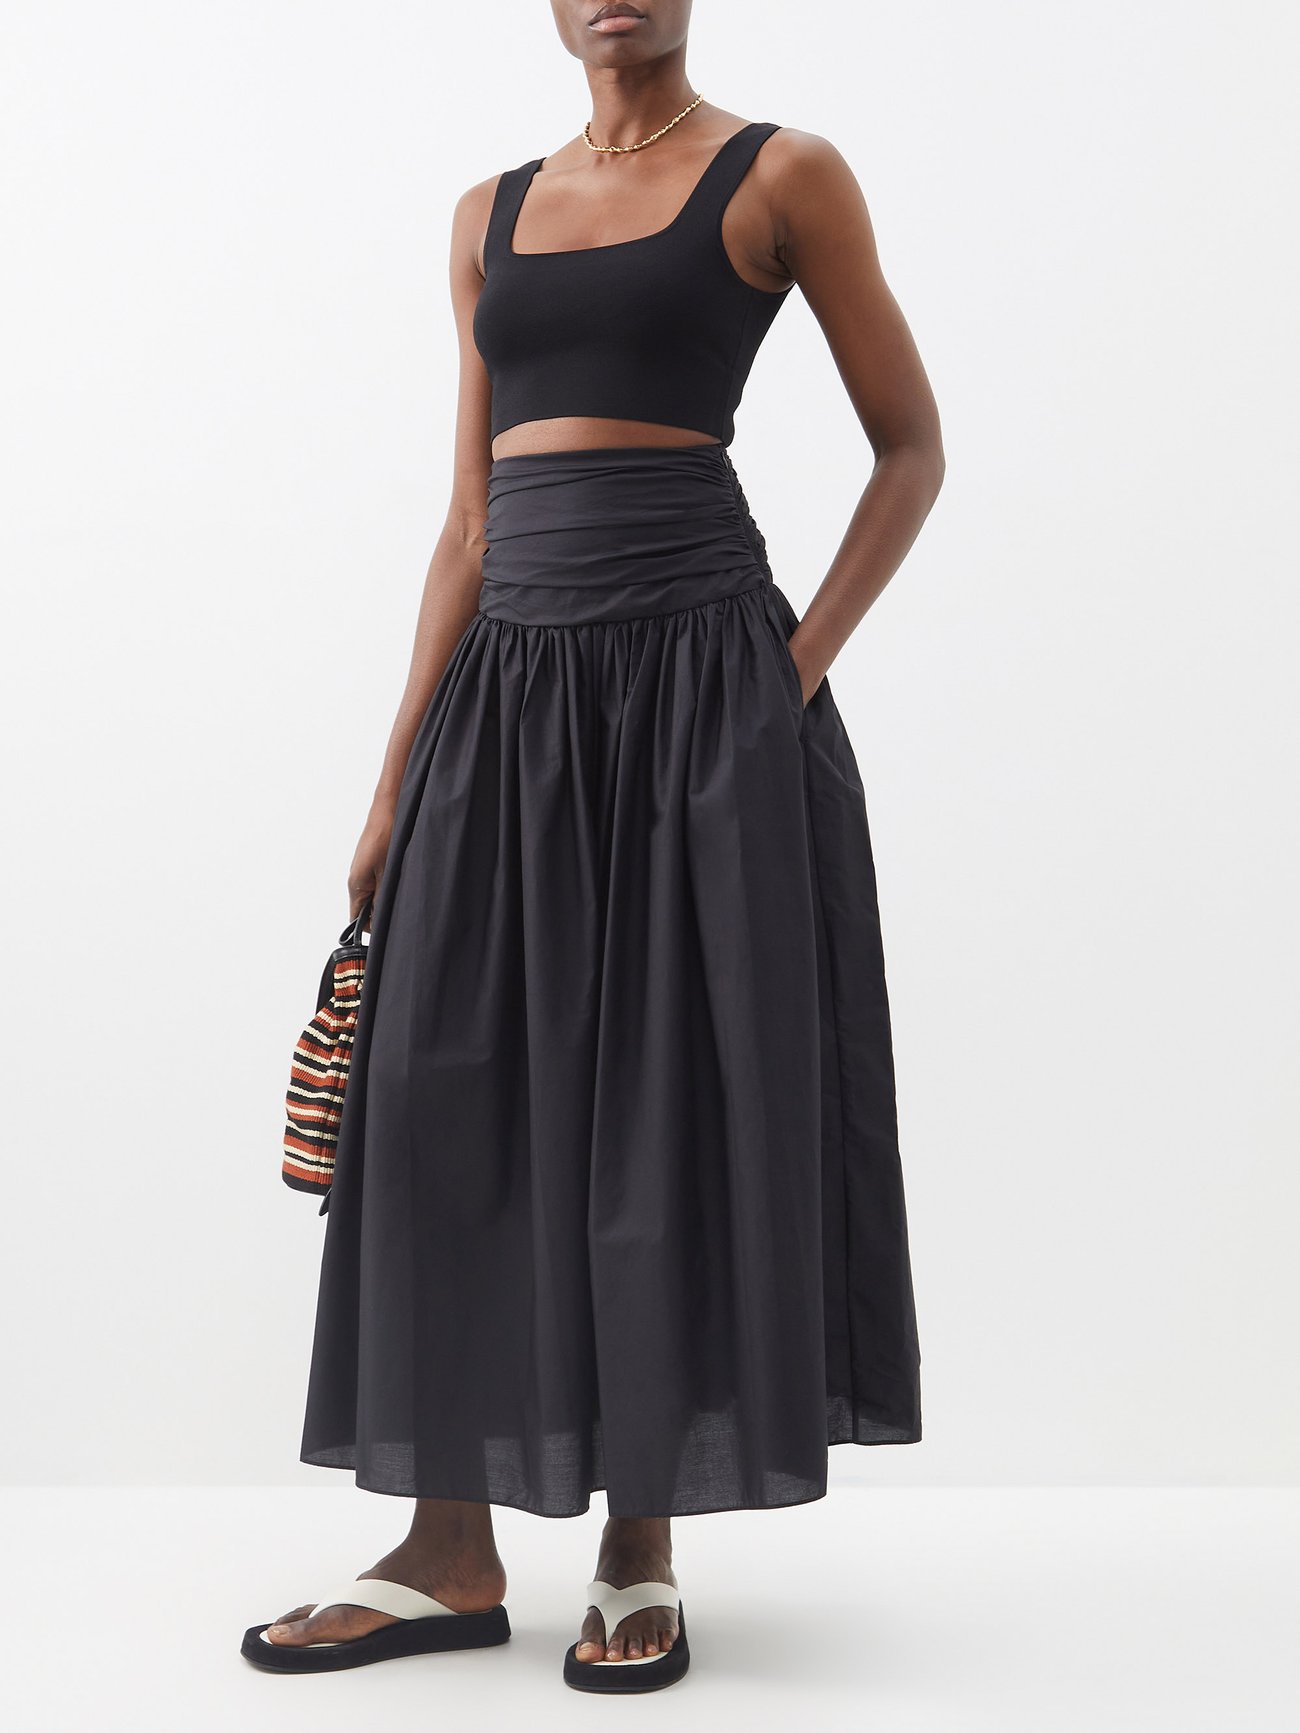 Matteau’s laid-back sensibility echoes throughout this black organic cotton maxi skirt, made in Australia. It has a defined high waist with ruching detail and fastens with a side zip. It has a fuller skirt and slide slip pockets. 